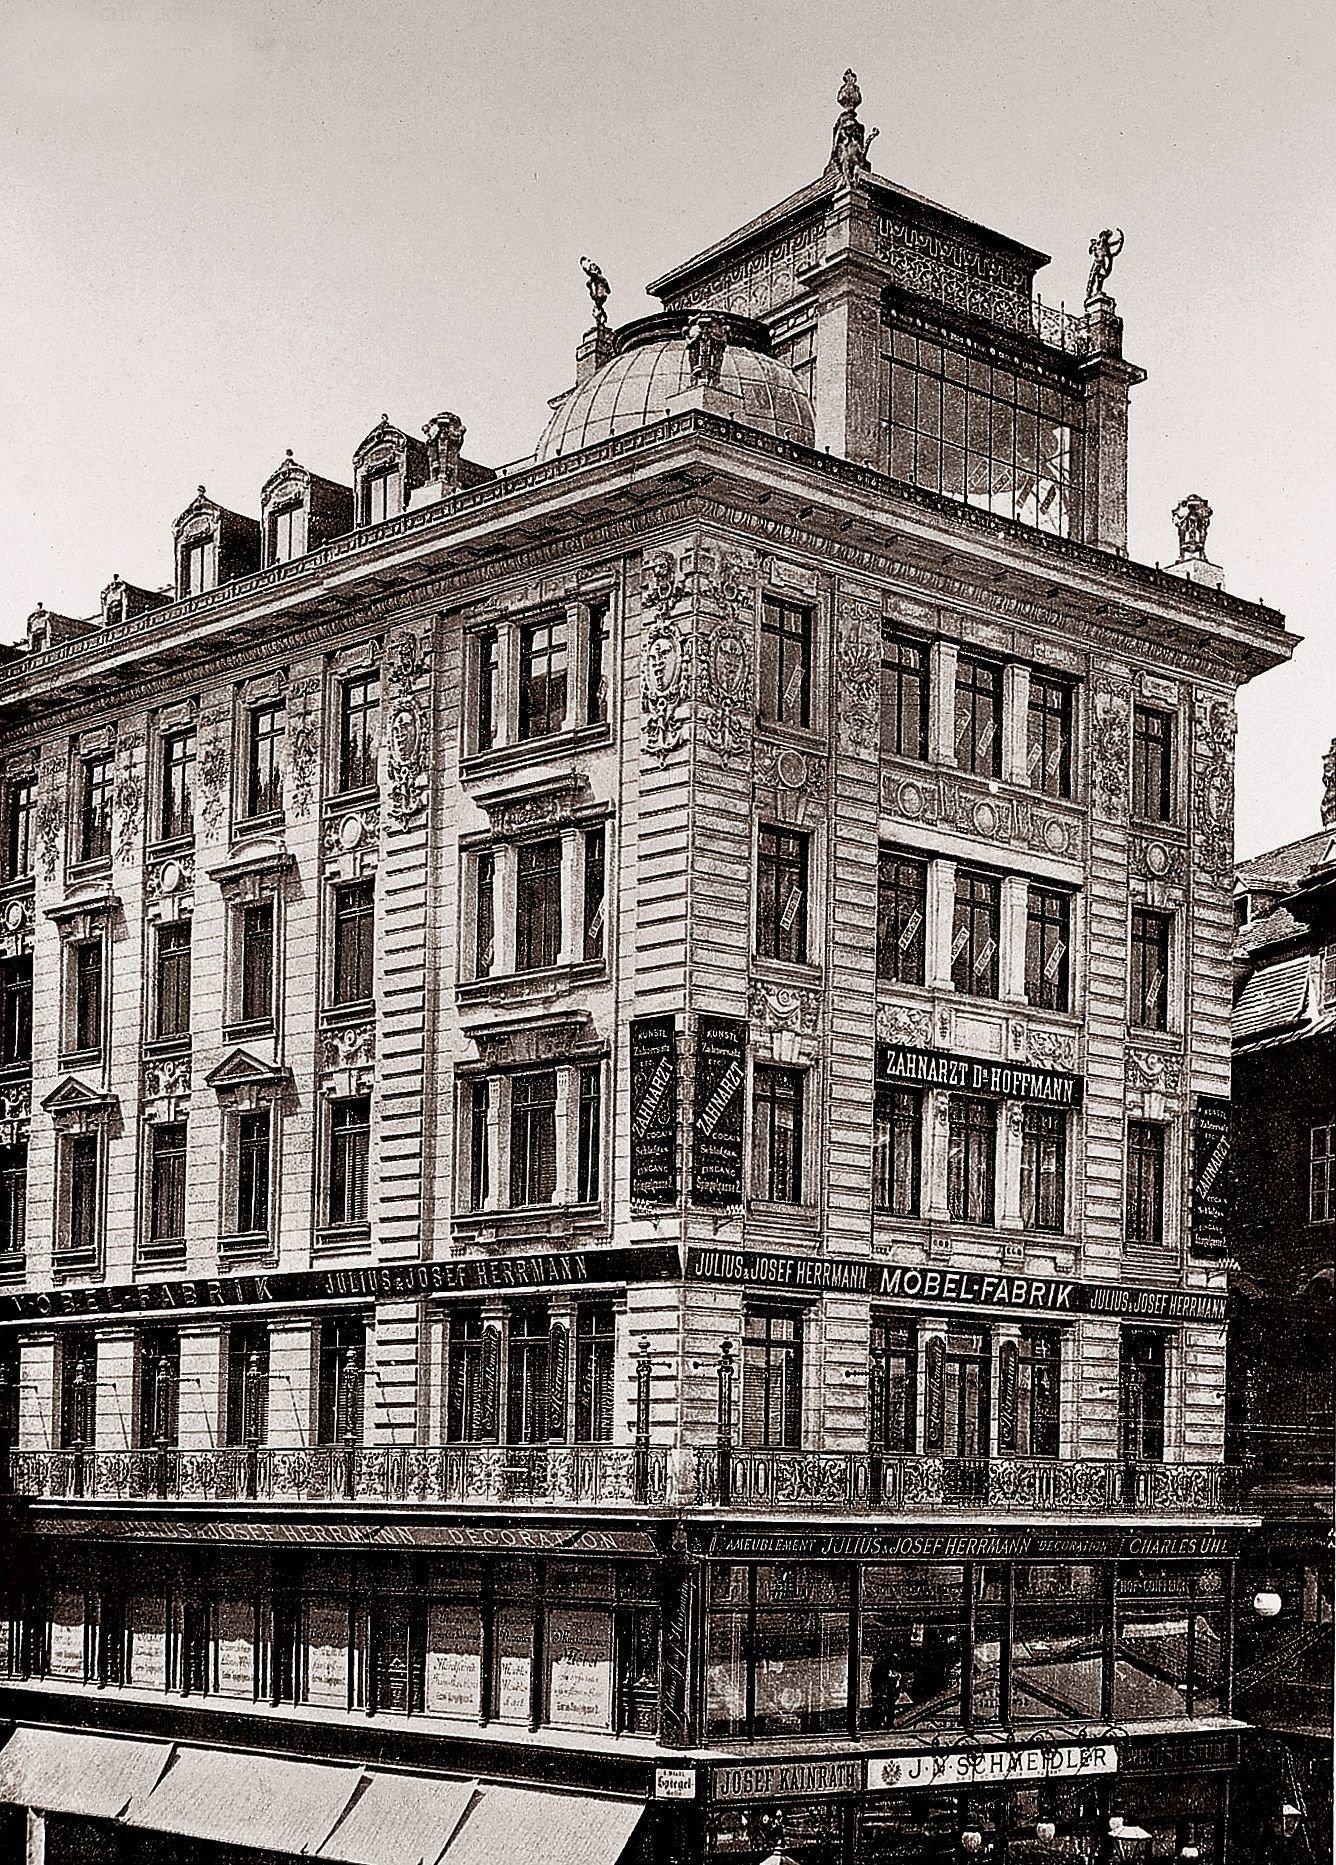 Building of Viennese insurance Company "Anker" in Vienna I, Corner of Graben 10 and Spiegelgasse 2. Built by Otto Wagner 1895, Around 1900